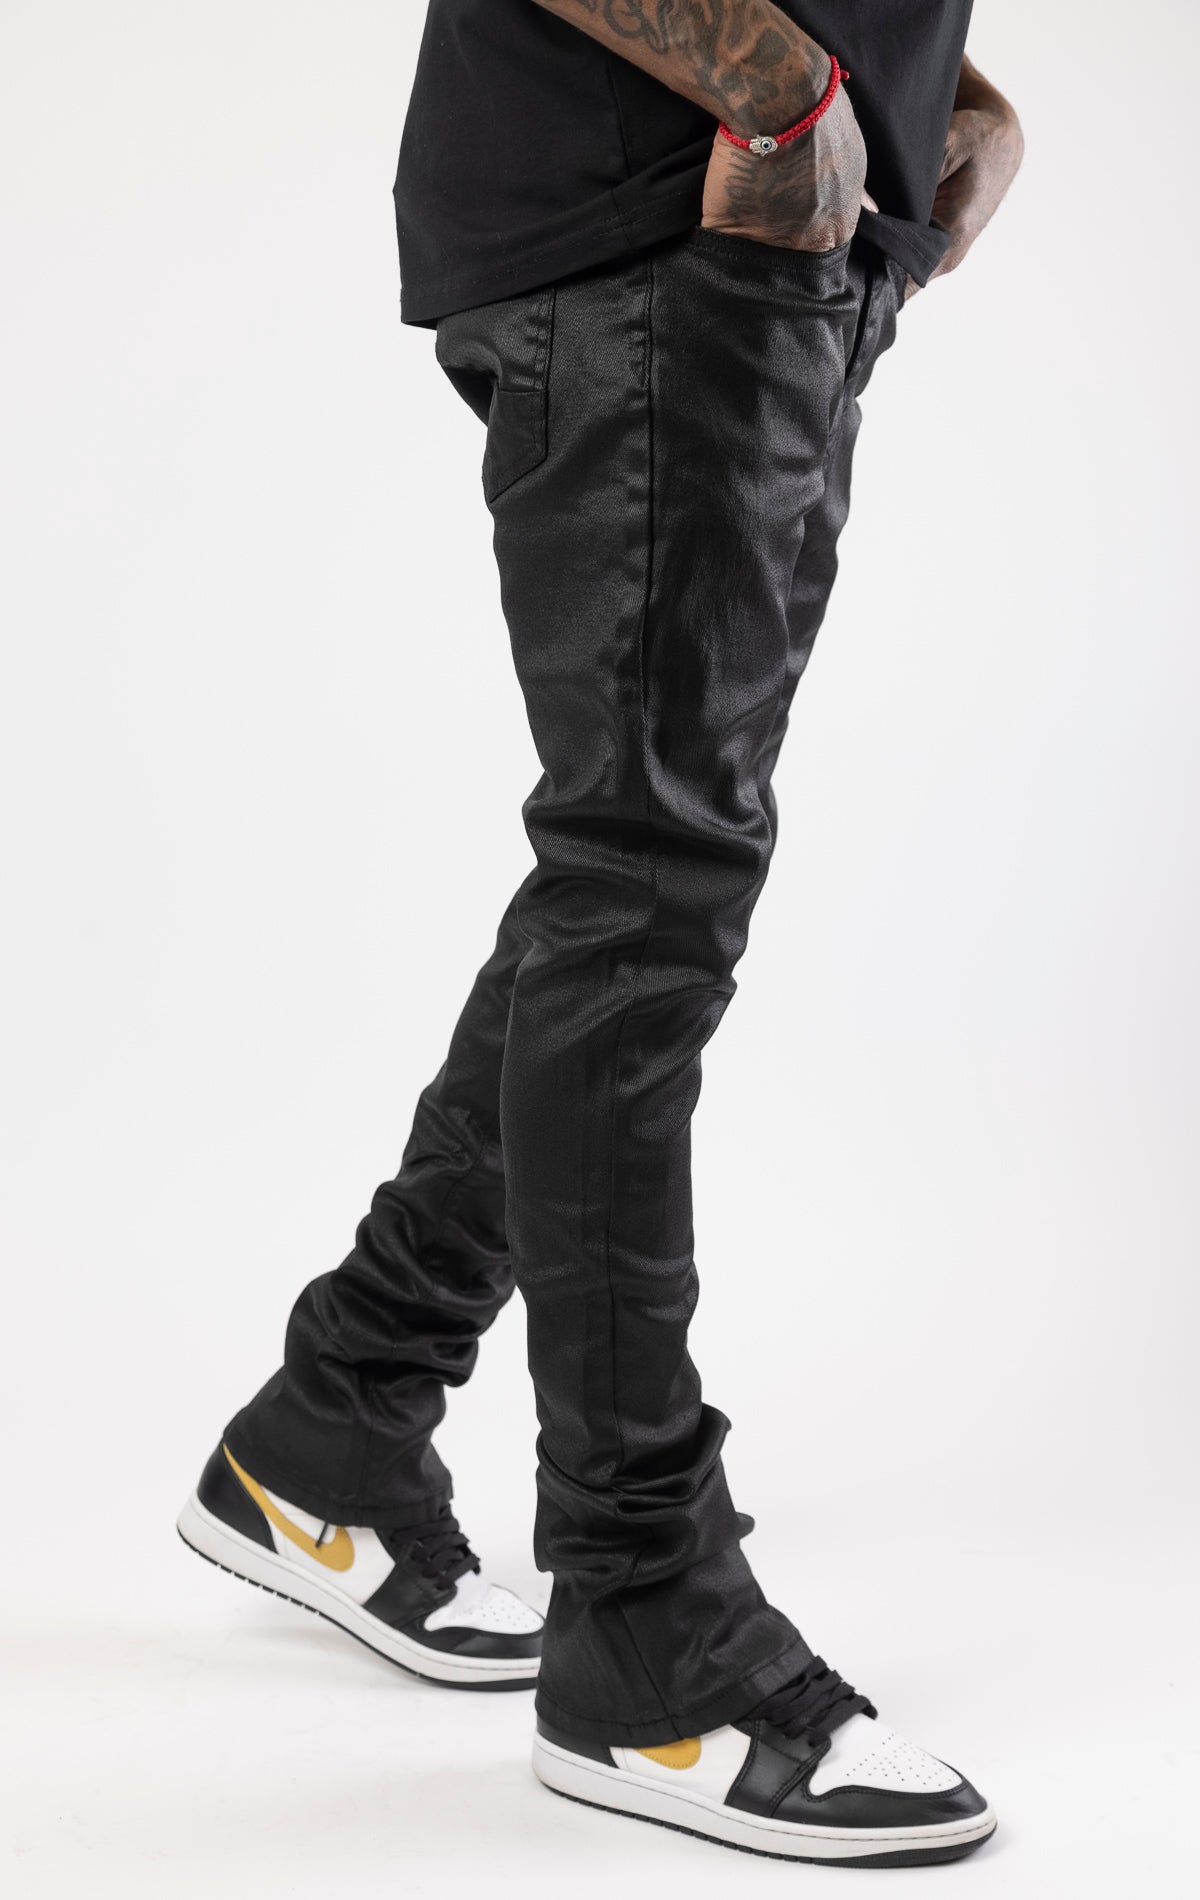 Black Glossy denim with a regular rise, flared stacked jeans